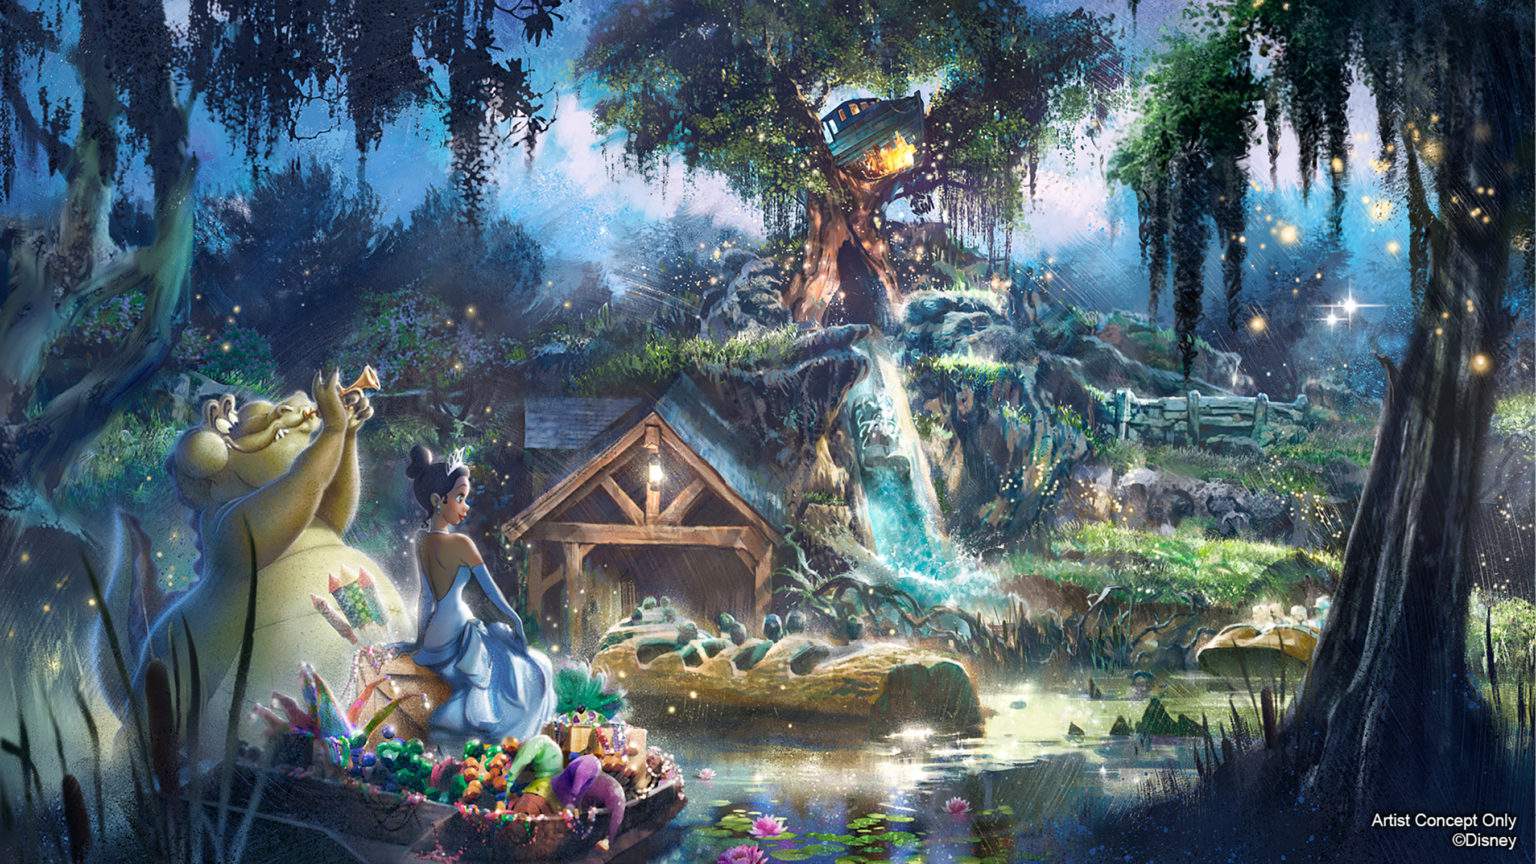 In case you missed it: Disney’s Splash Mountain to be re-themed to ‘Princess and the Frog’